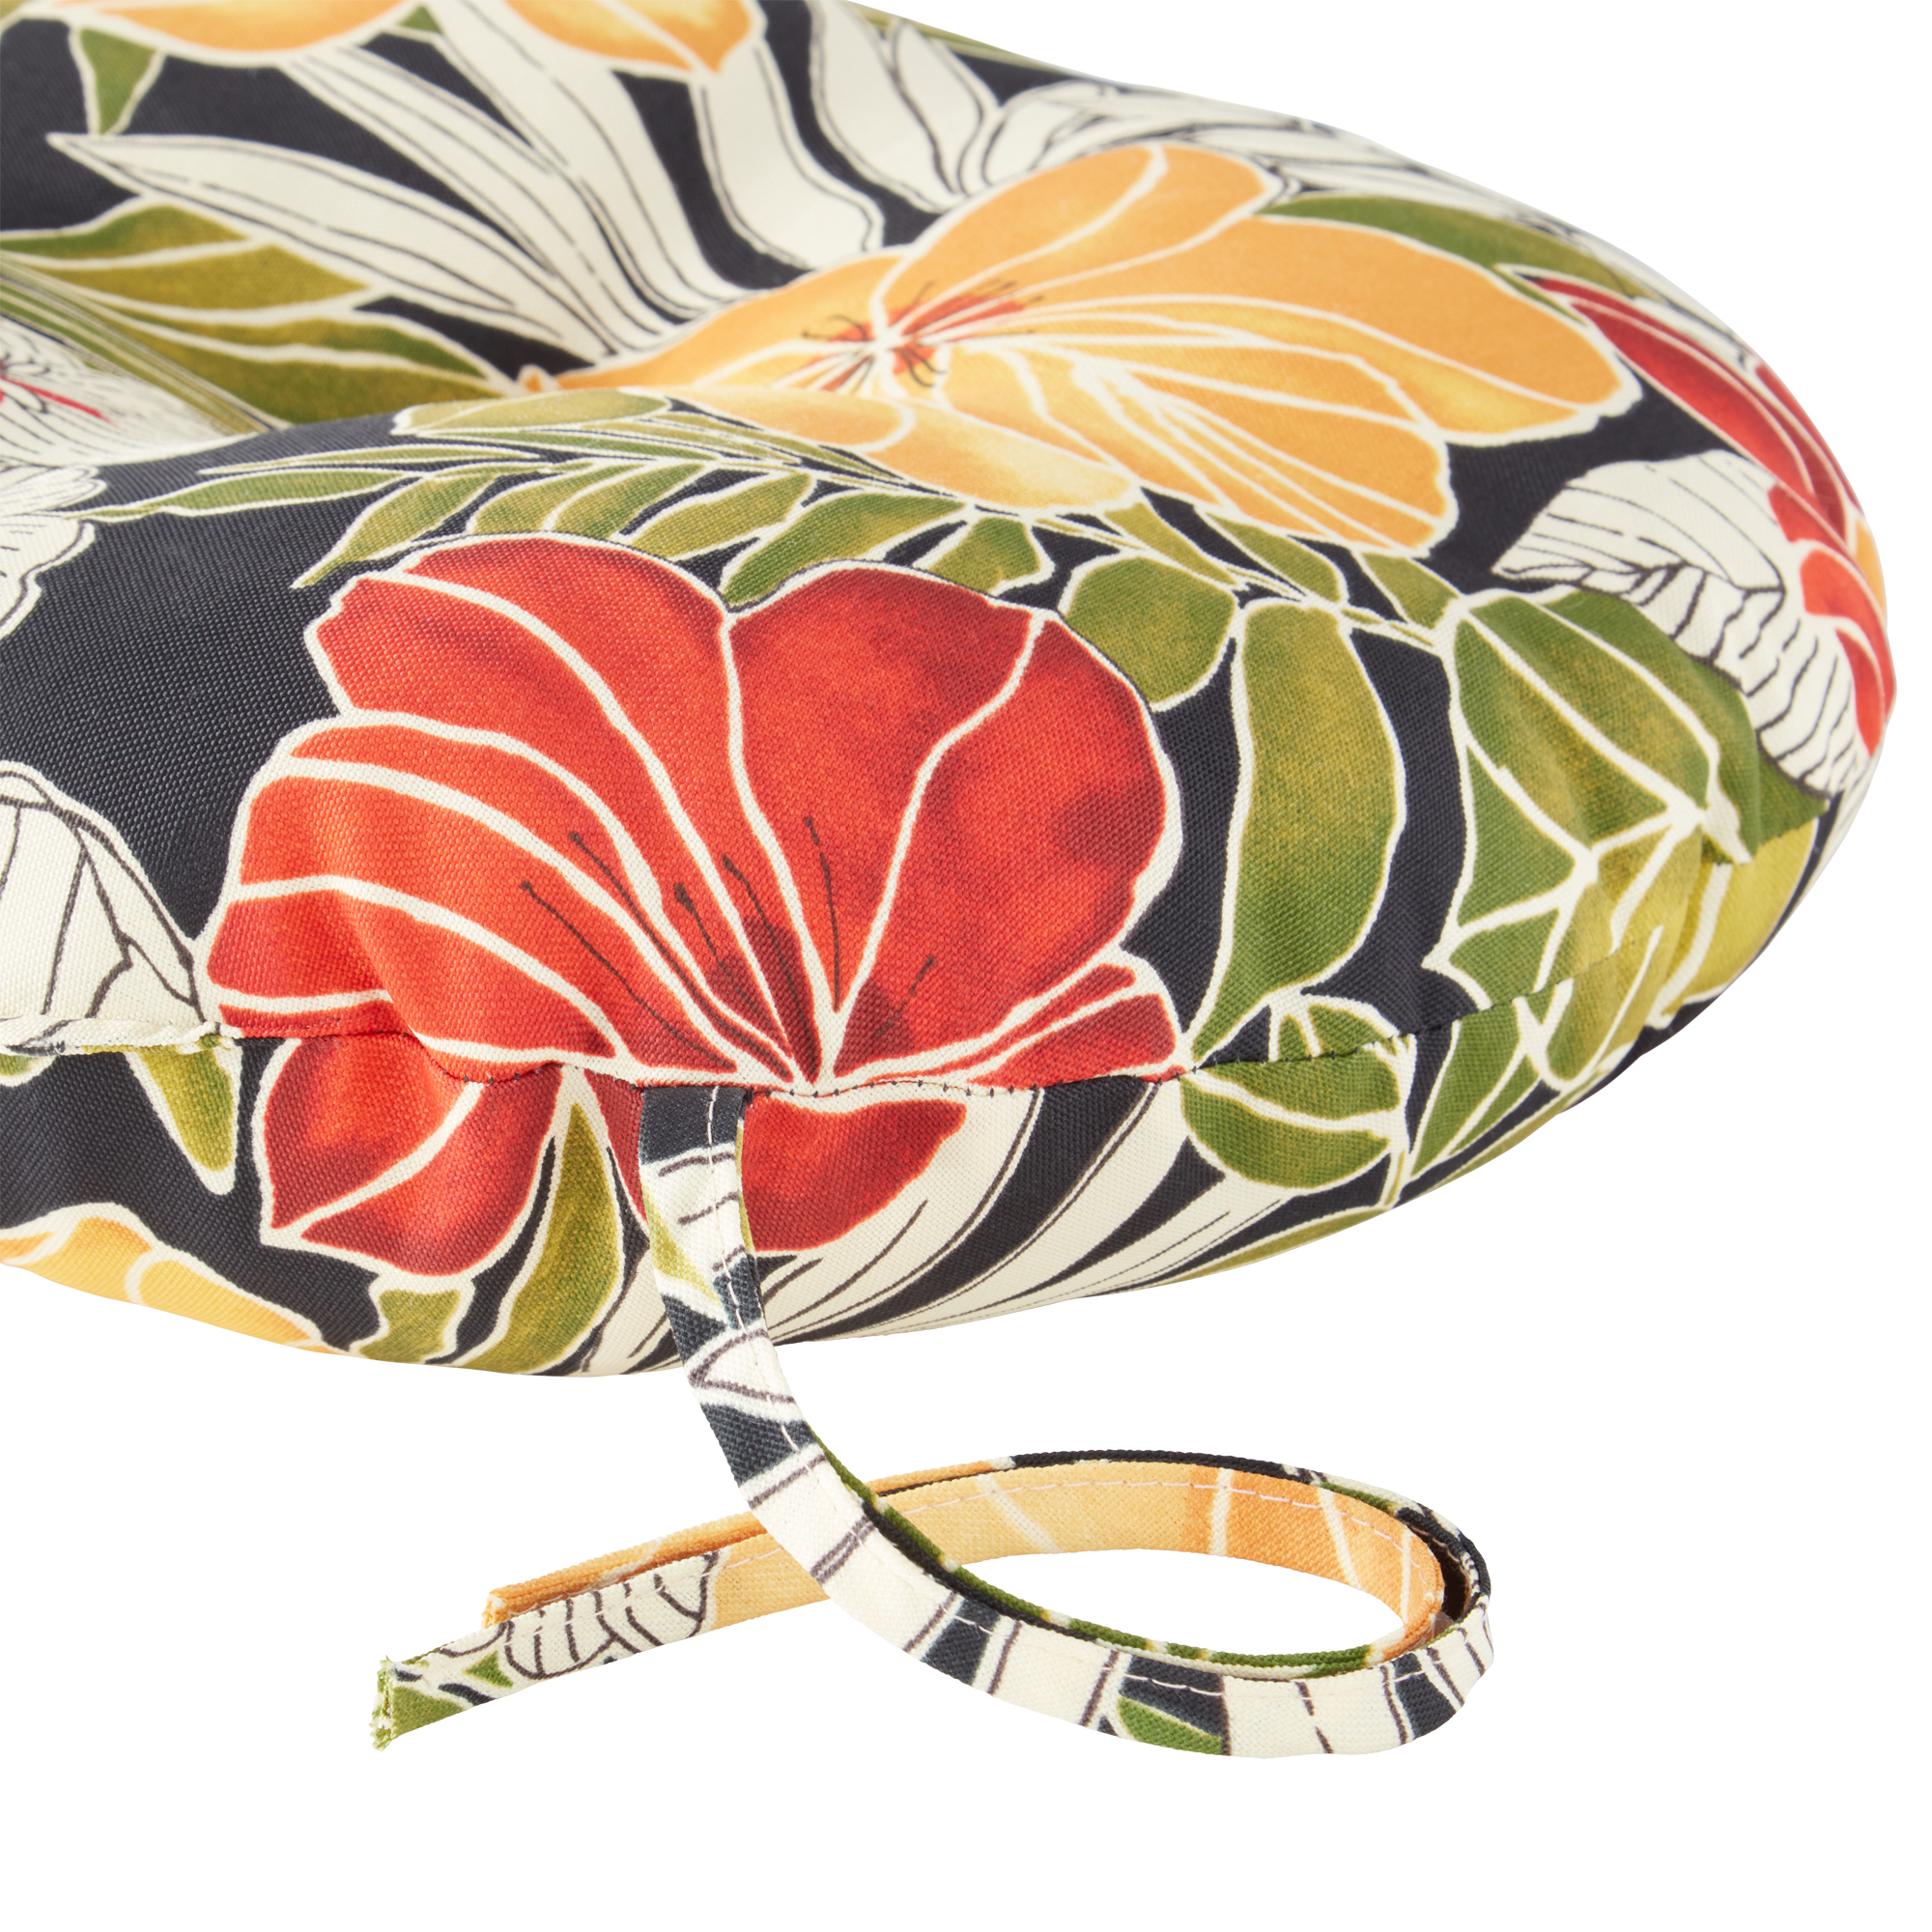 Greendale Home Fashions Aloha Black Floral 15 in. Round Outdoor Reversible Bistro Seat Cushion (Set of 2) - image 3 of 5